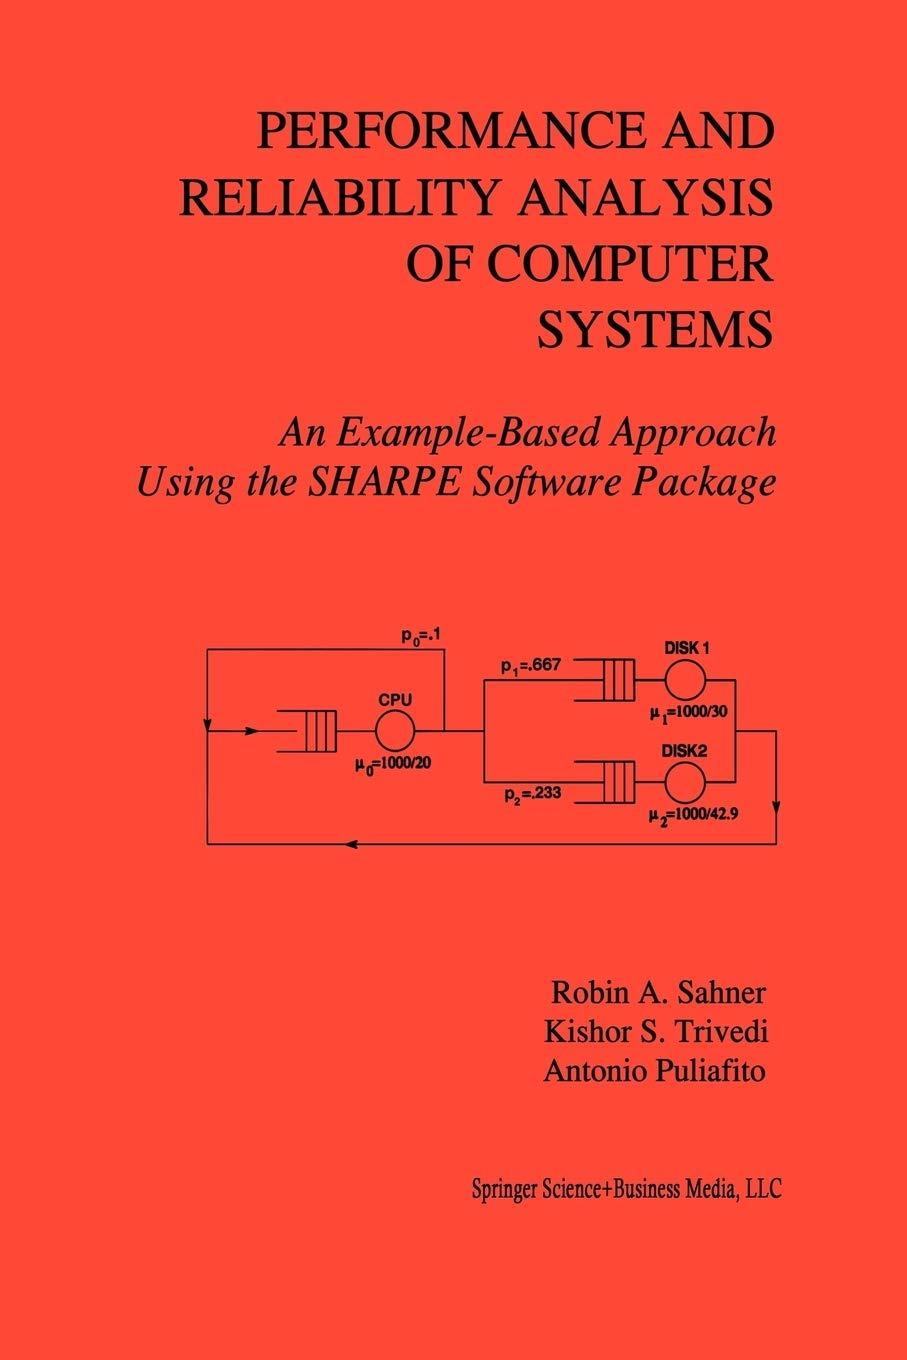 Performance And Reliability Analysis Of Computer Systems An Example Based Approach Using The SHARPE Software Package